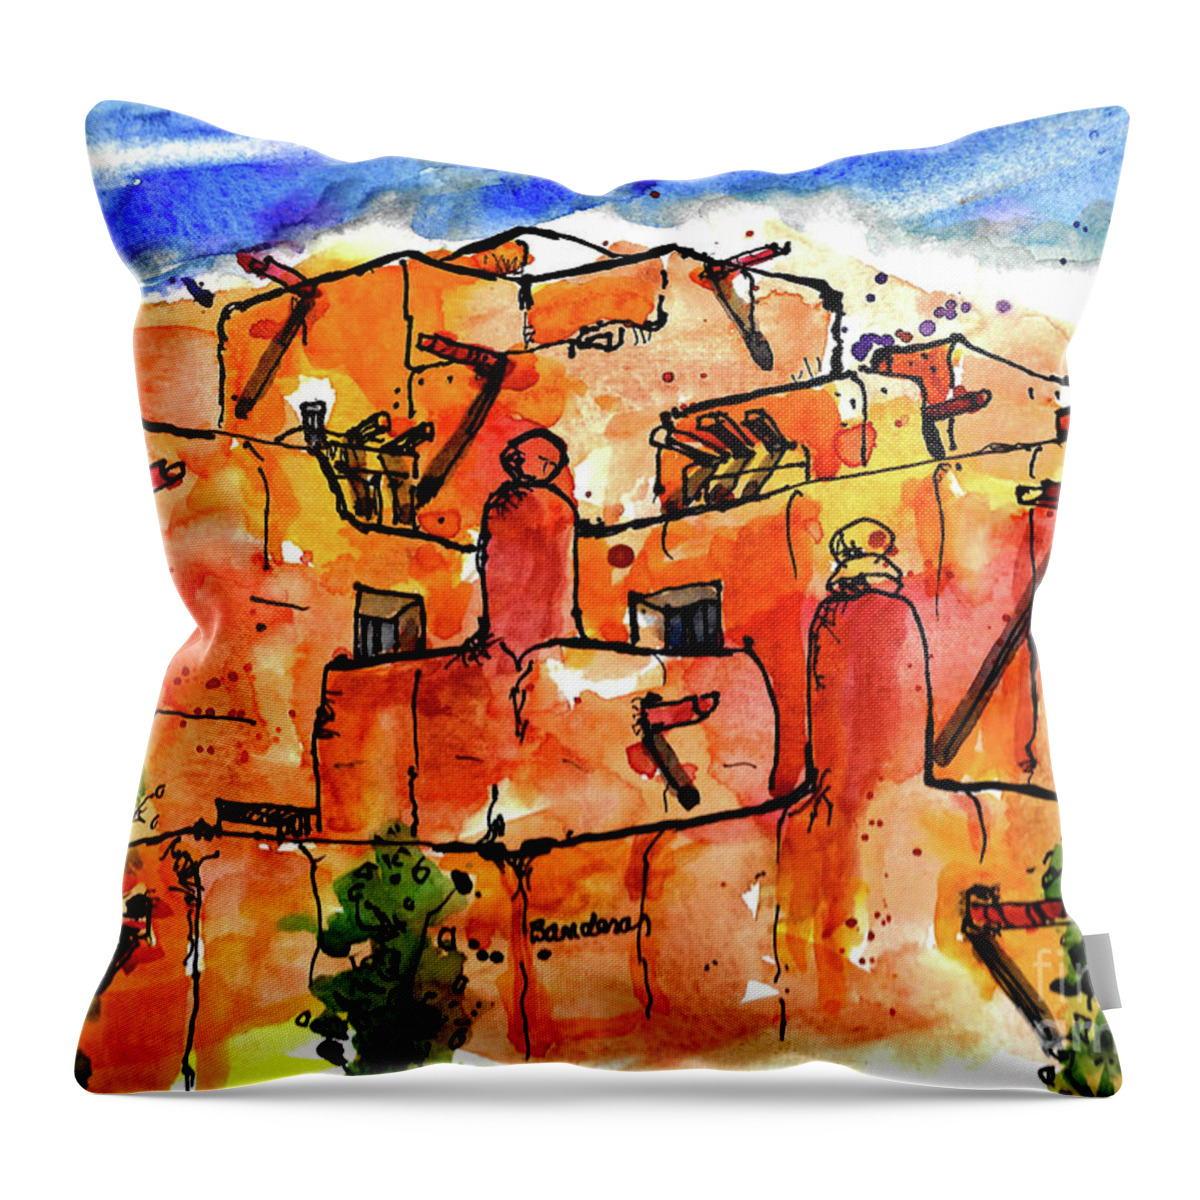 Southwest Throw Pillow featuring the painting Southwestern Architecture by Terry Banderas